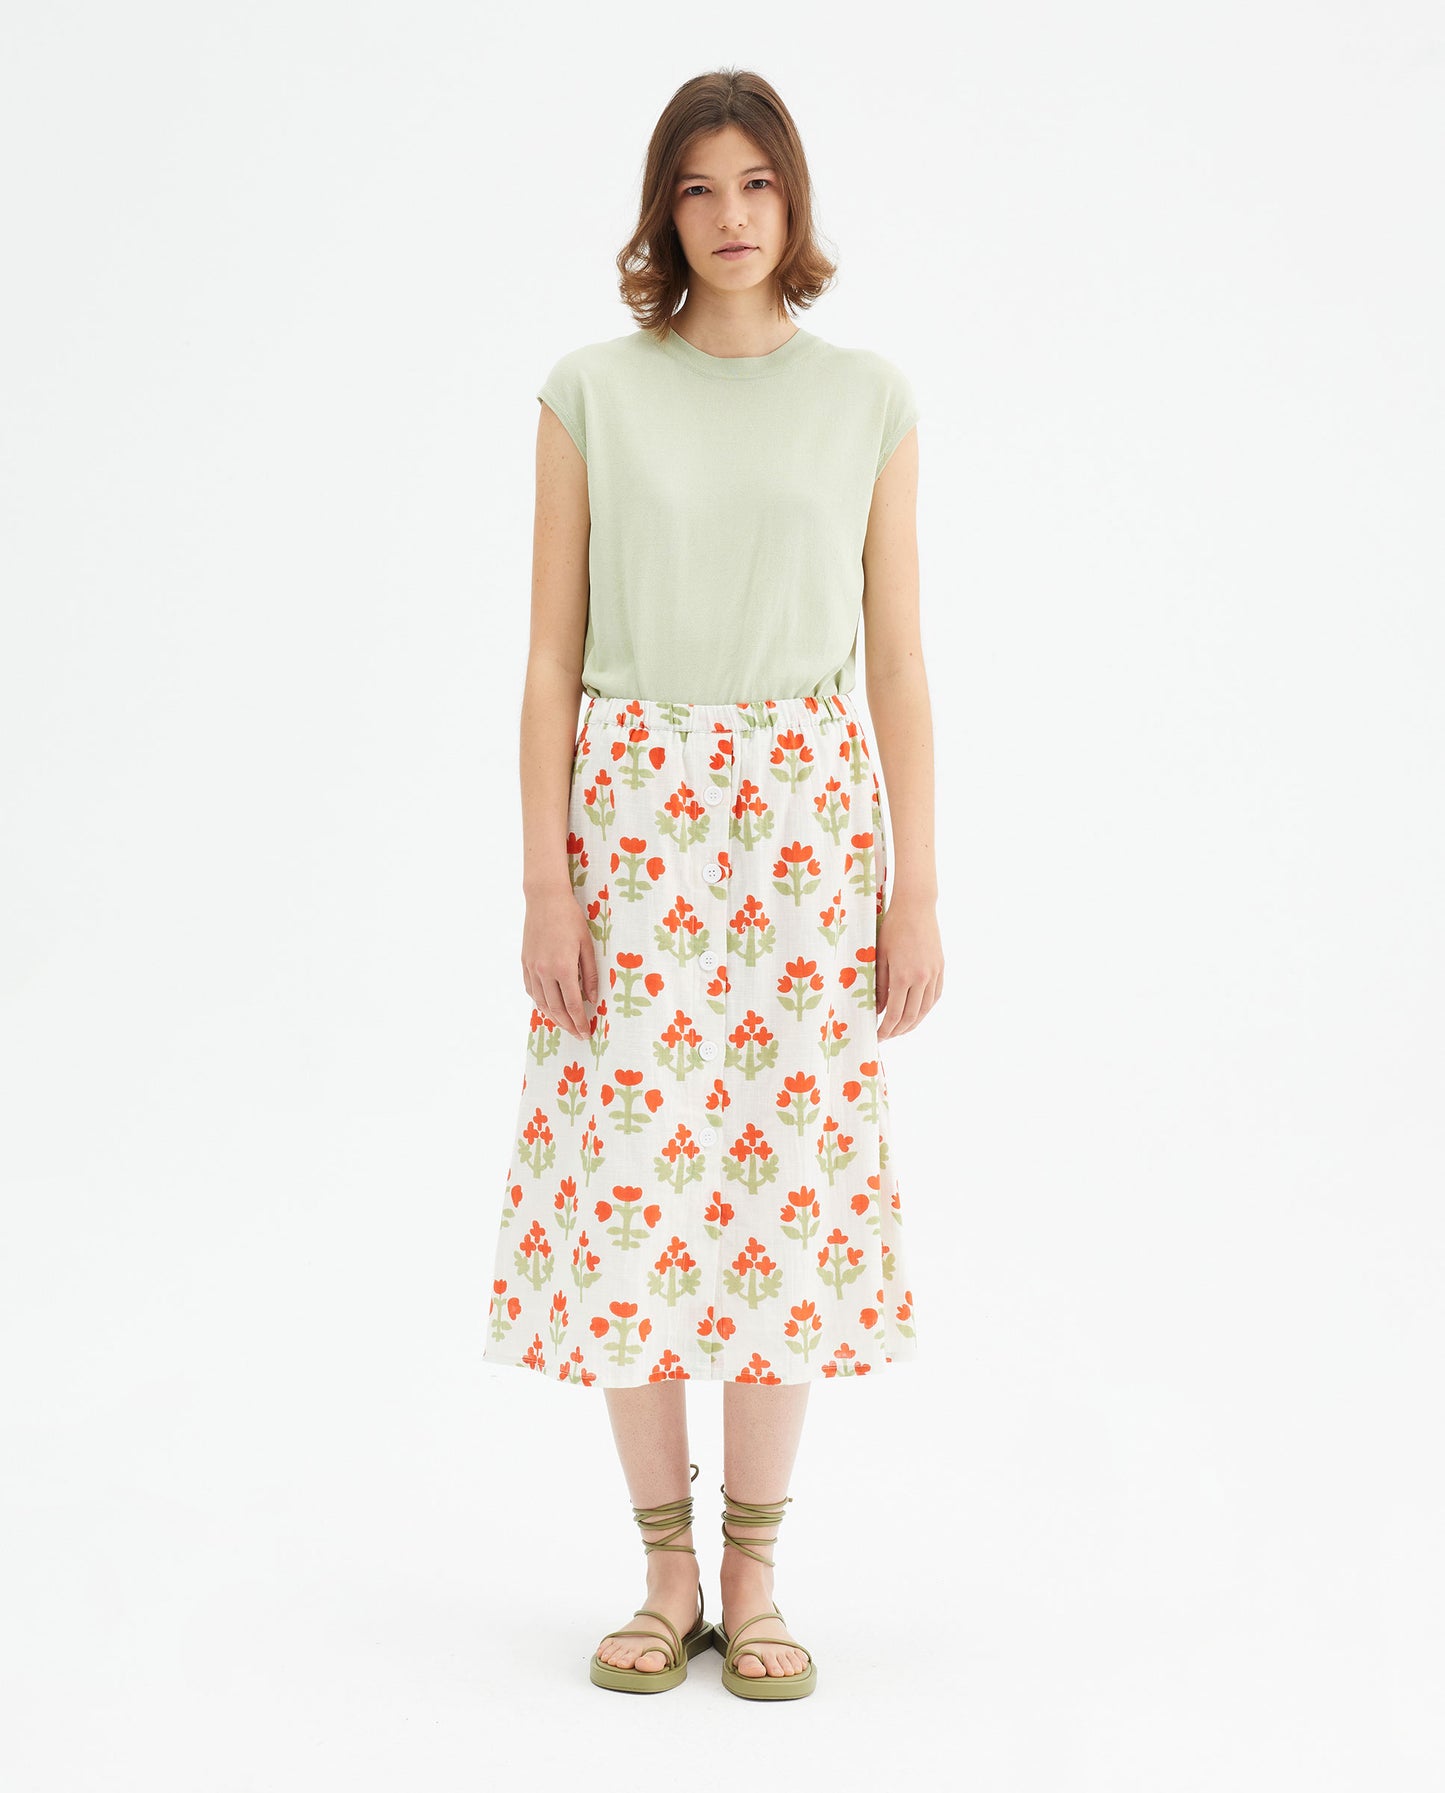 Floral Print Midi Skirt With Buttons